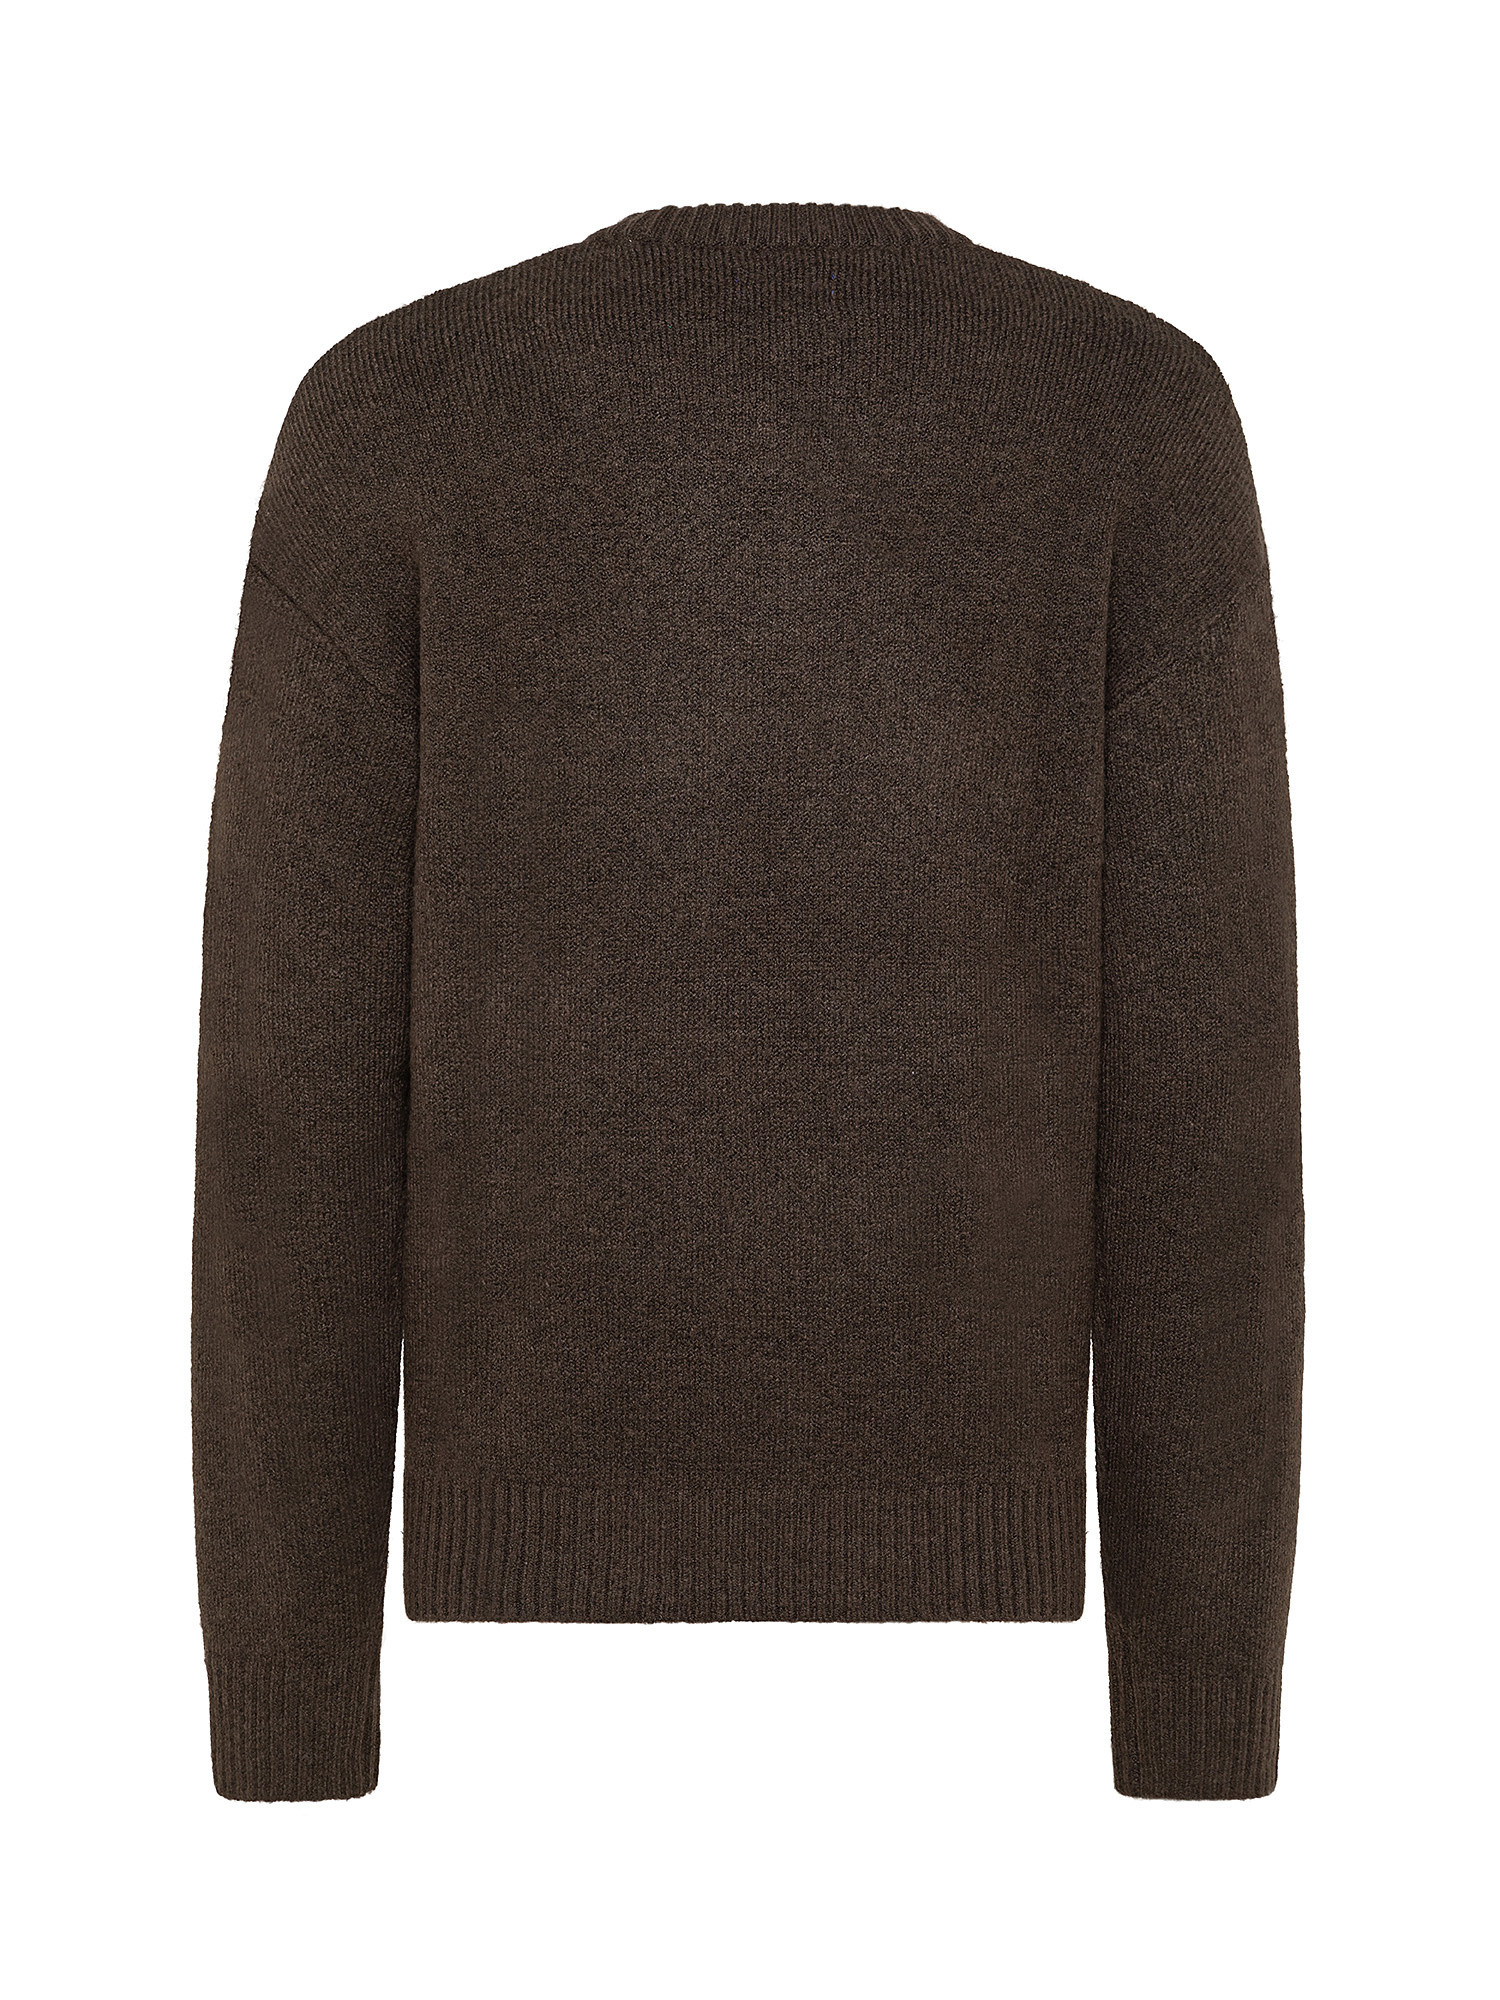 Pullover with long sleeves, Brown, large image number 1